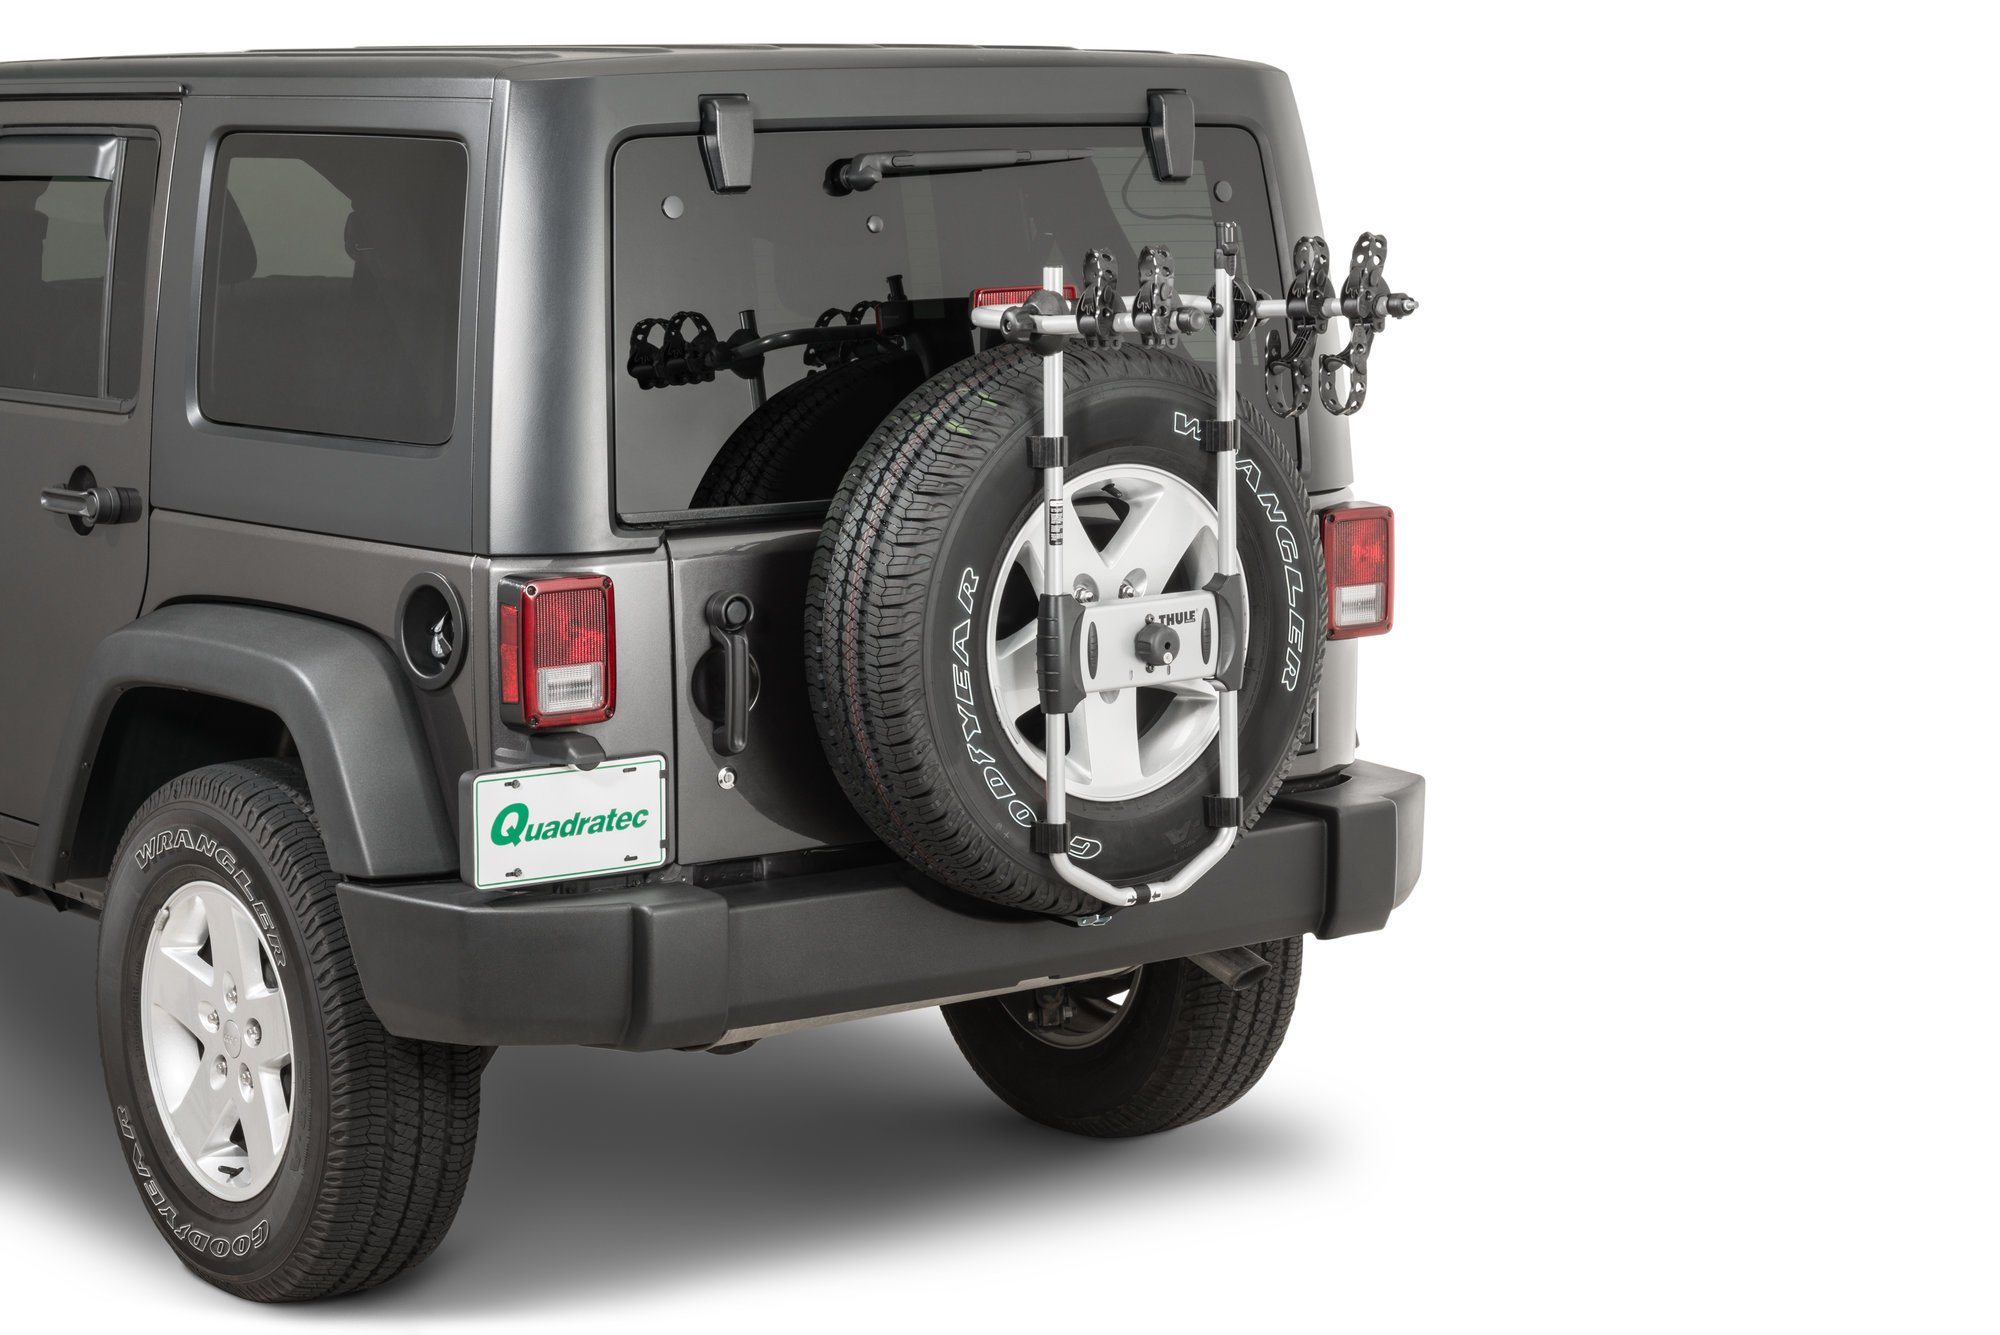 Bike Rack Rated for Jeep Wrangler toad? - iRV2 Forums